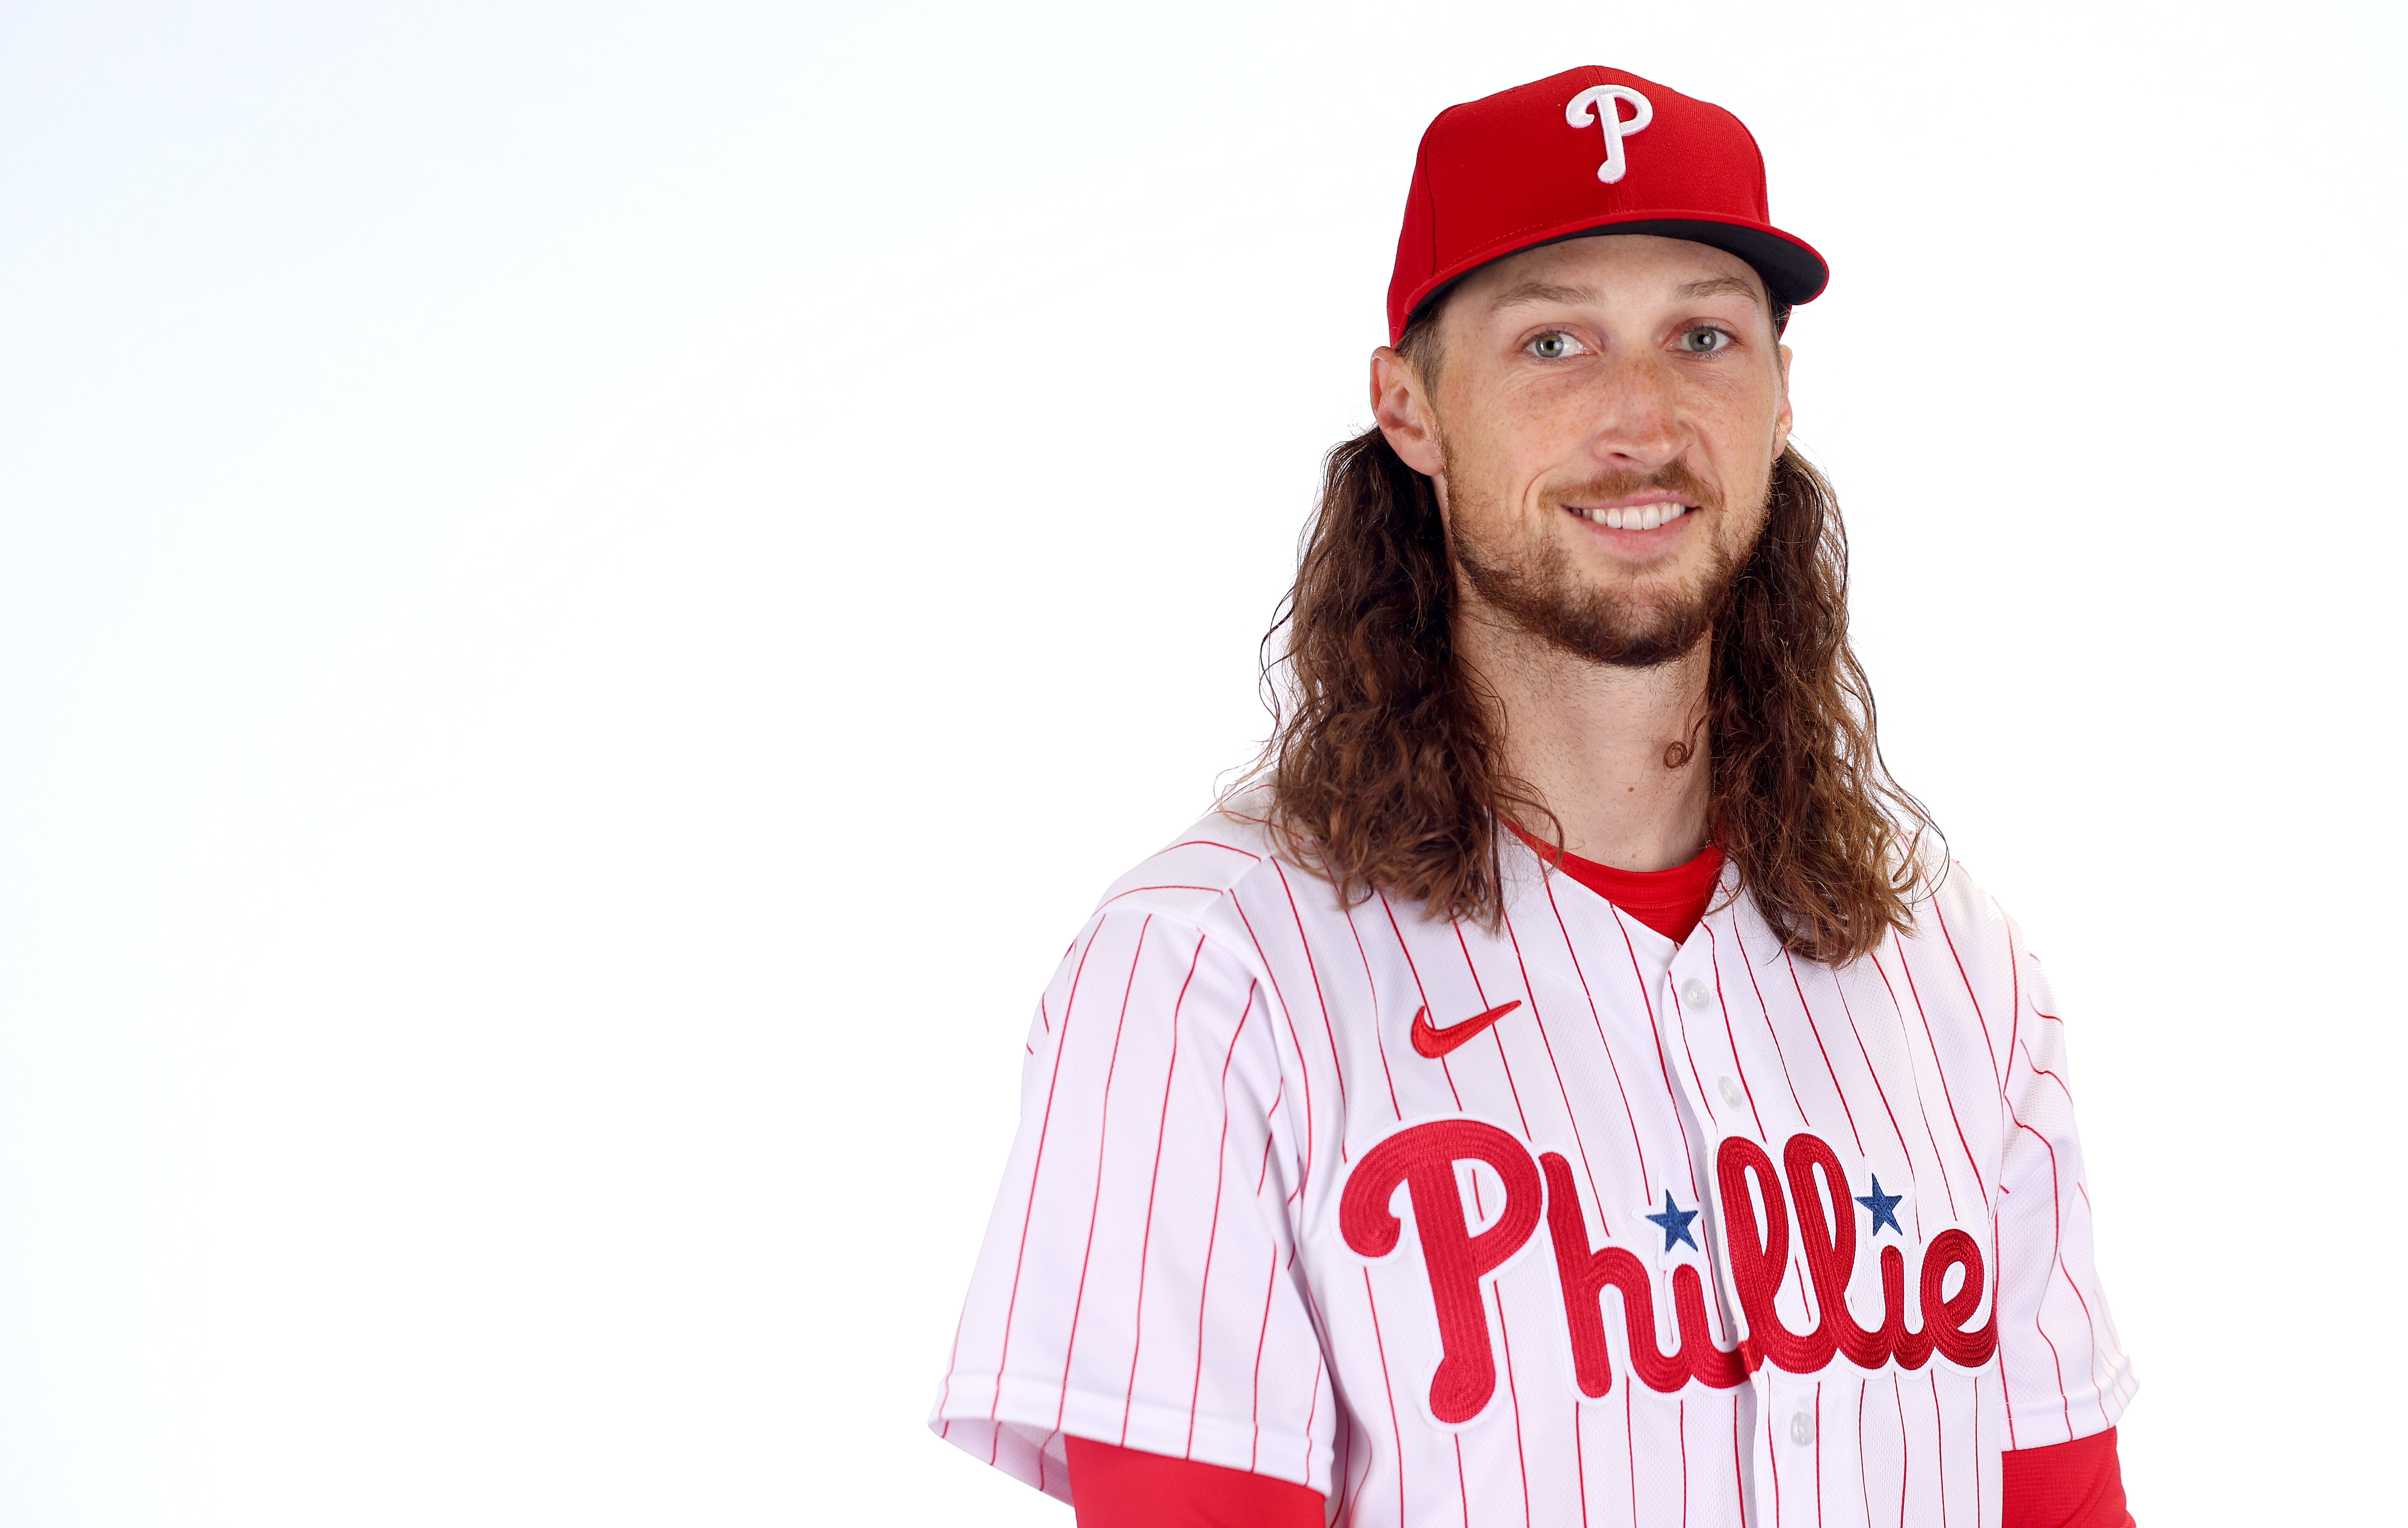 Matt Strahm Is a Temporary Fix for a Depleted Phillies Rotation